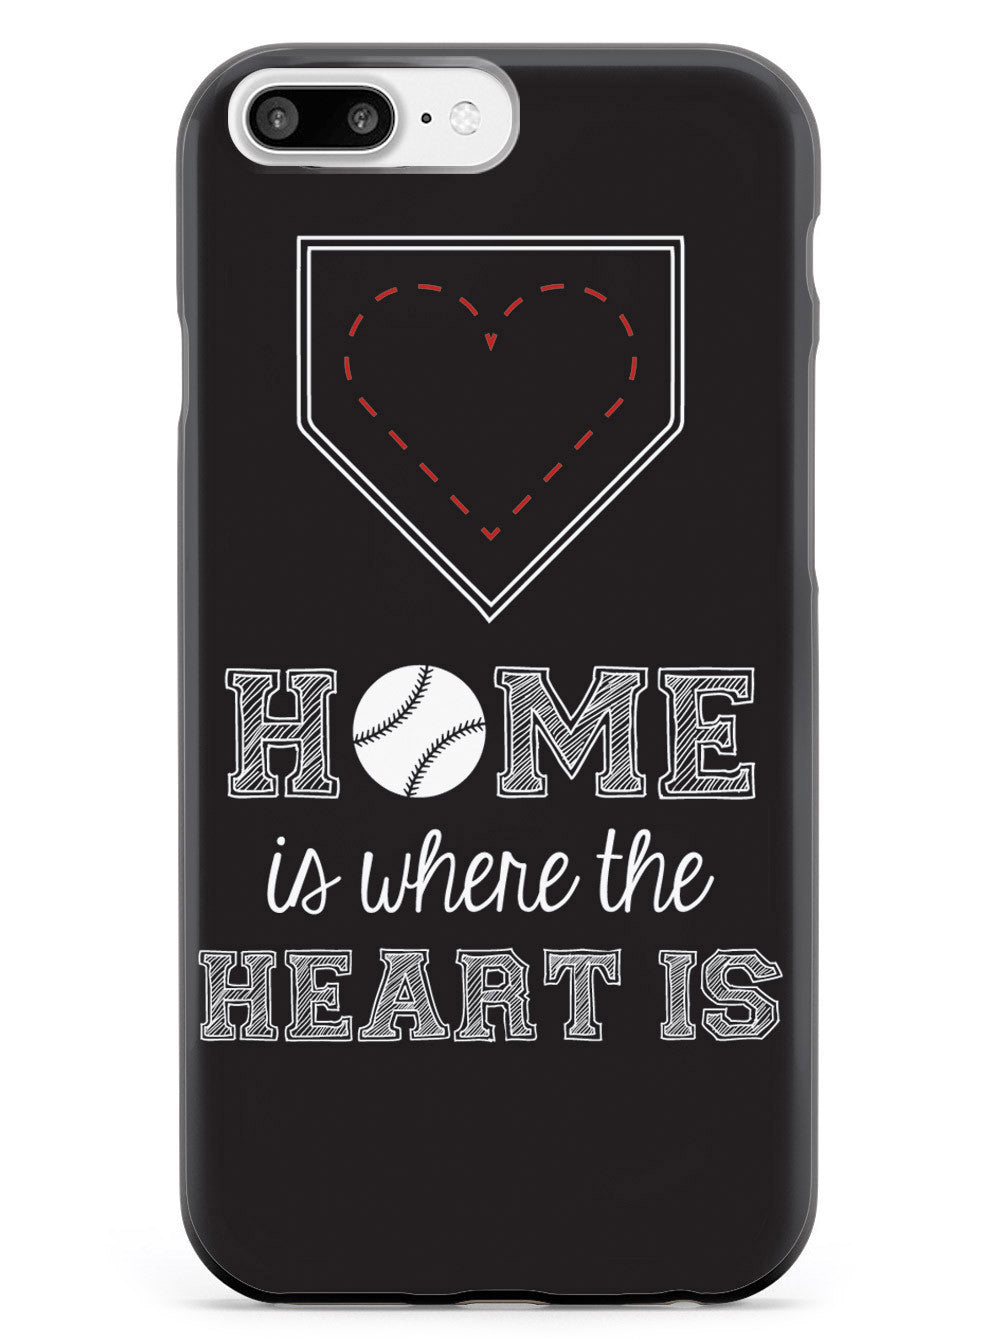 Home is Where the Heart is - Baseball Case